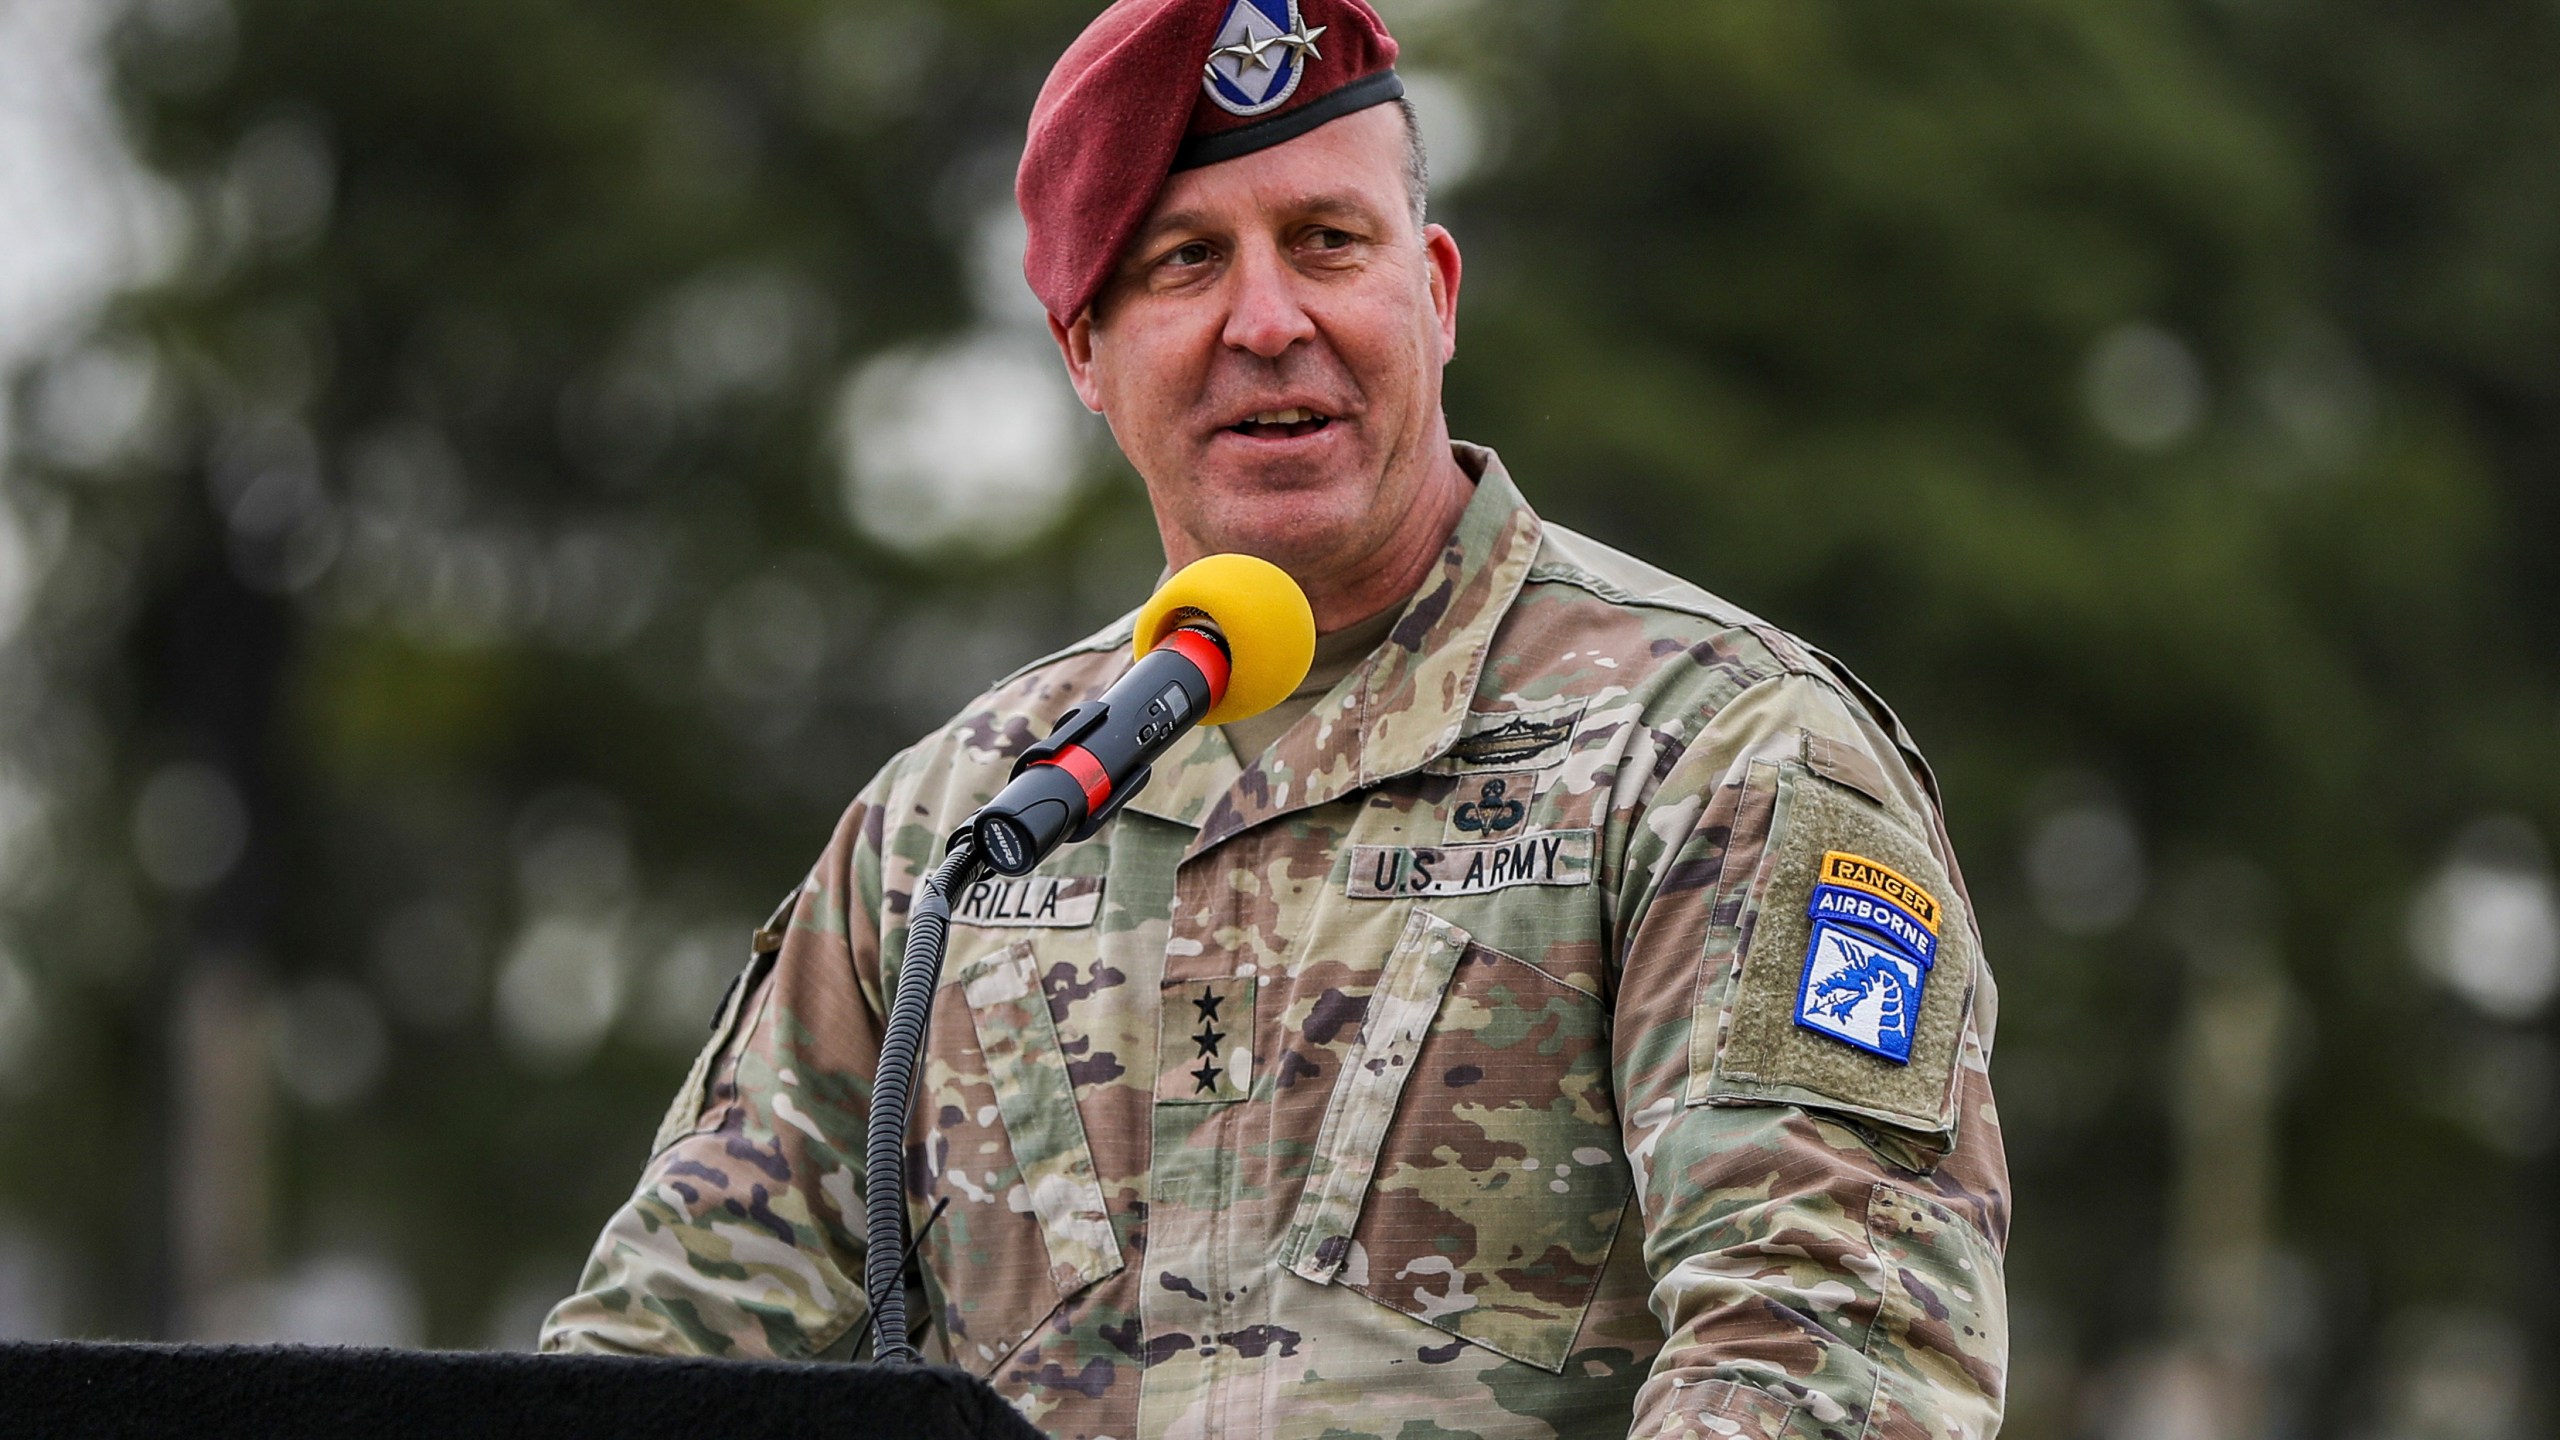 Then Lt. Gen. Michael "Erik" Kurilla gives a speech March 5, 2021, in Fort Campbell, Ky. Army Gen. Kurilla, head of U.S. Central Command, told a Senate committee Thursday, March 7, 2024, that exploding violence in the Middle East, fueled by Iran, presents the most likely threat to the U.S. homeland, and the risk of an attack by violent extremists in Afghanistan on American and Western interests abroad is increasing, the top U.S. commander for the Mideast. (Spc. Andrea Notter/U.S. Army via AP)